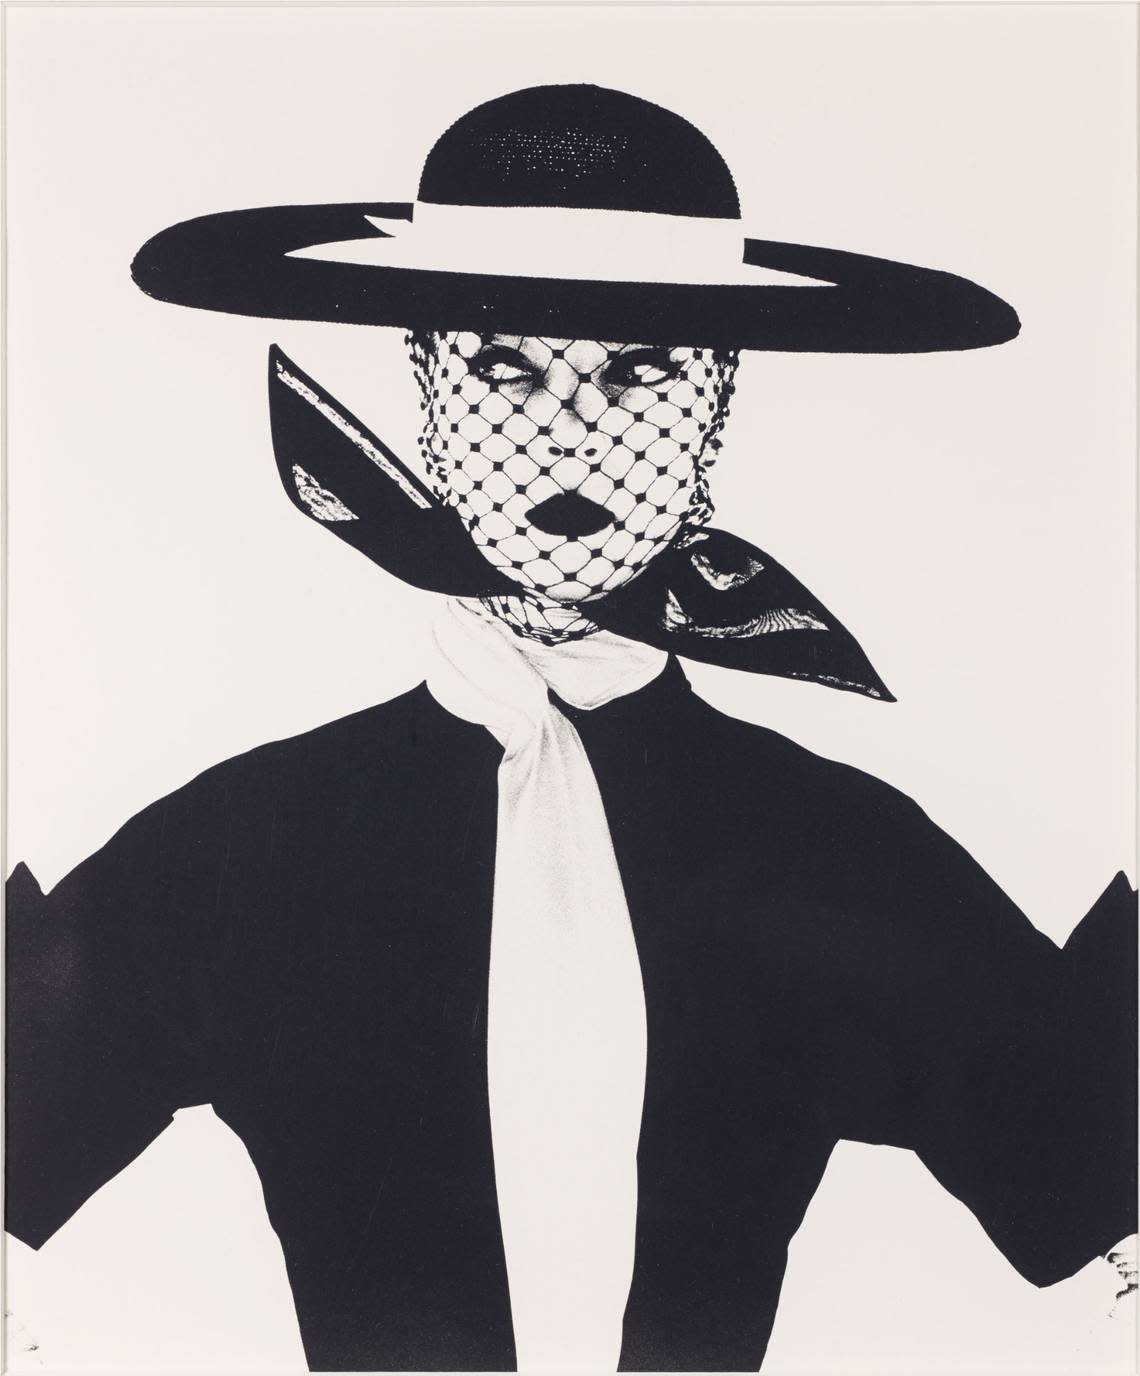 Irving Penn shot this black-and-white image of Jean Patchett for a Vogue cover in 1950. It is part of a show featuring images from the Nicola Erni Collection at the Norton Museum in Palm Beach opening Oct. 15, 2022.